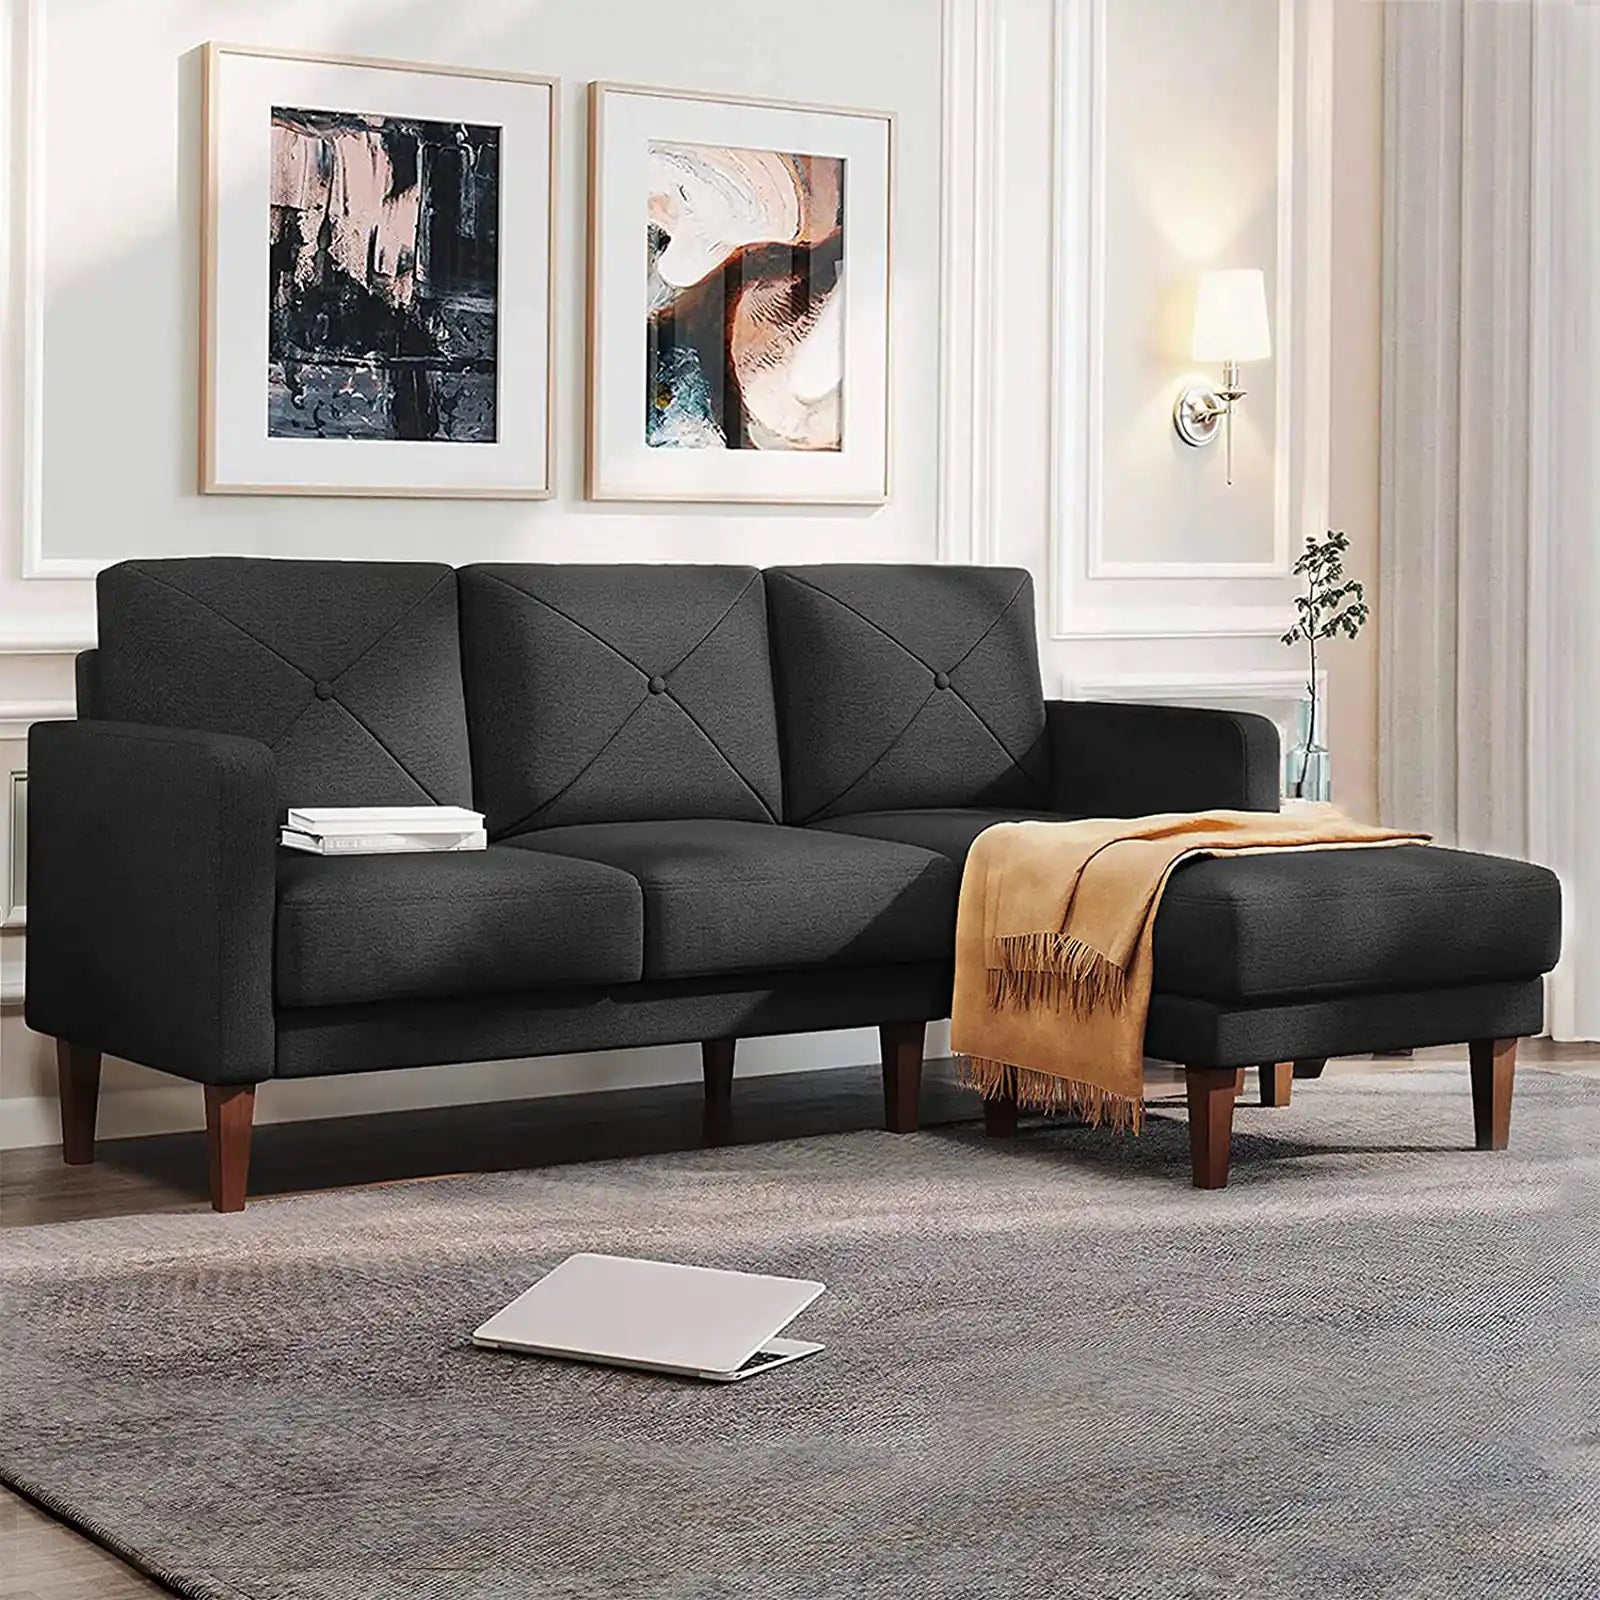 Convertible and Reversible Sectional Sofa Couch with Chaise